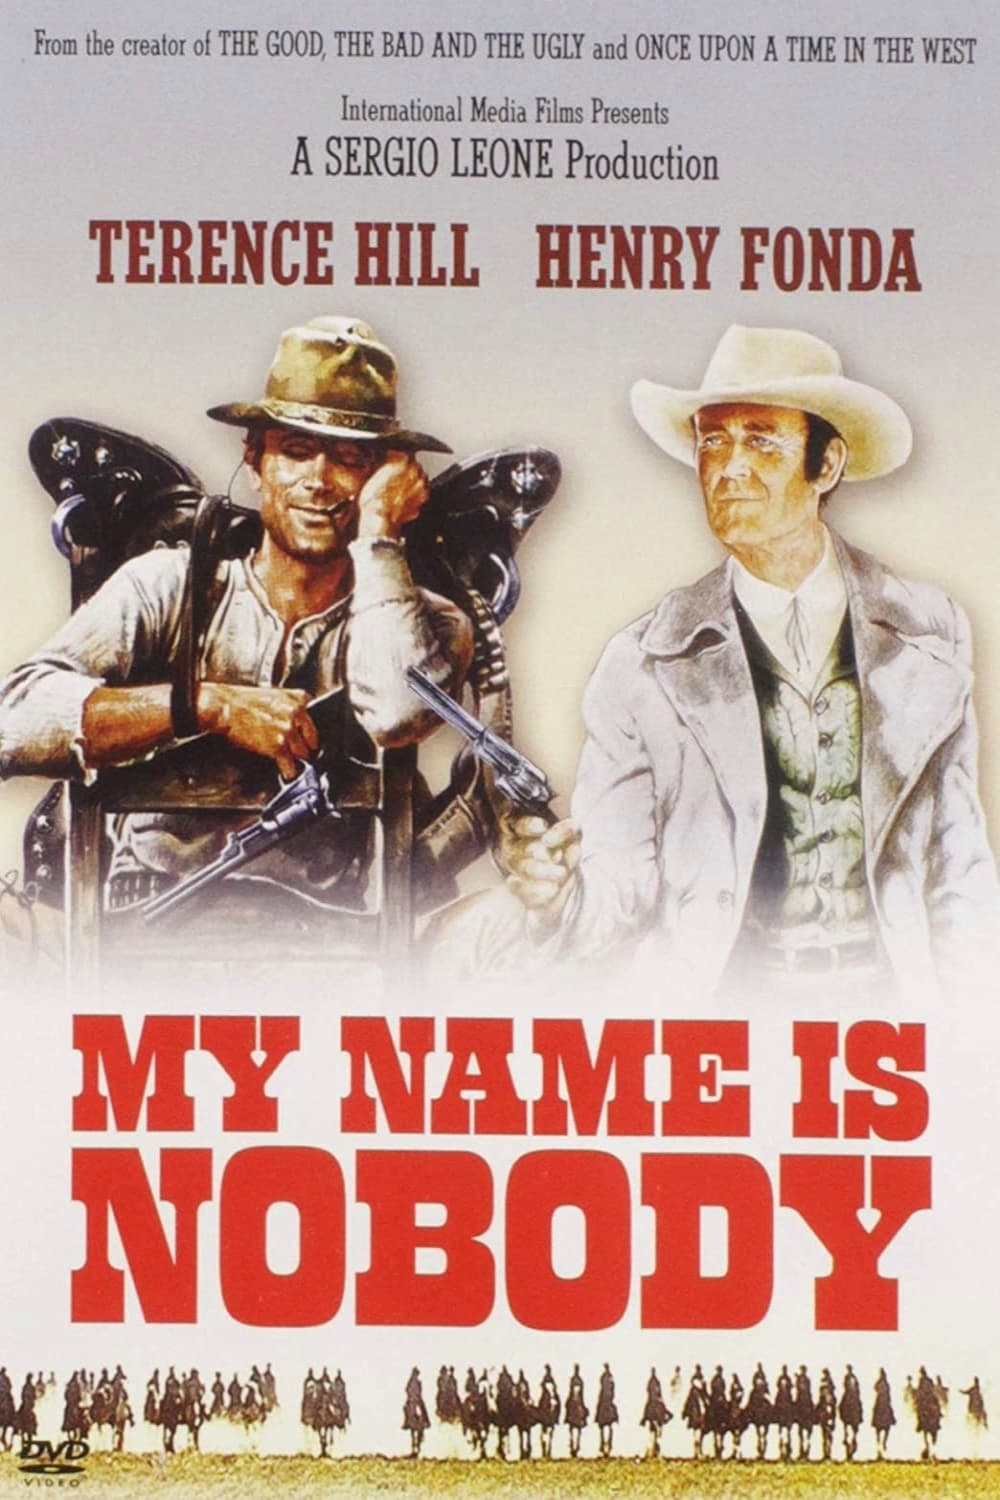 "Mein Name ist Nobody-Western in 4K-UHD, remastered, 200% Upscale, 3840x2160 Px. 1973